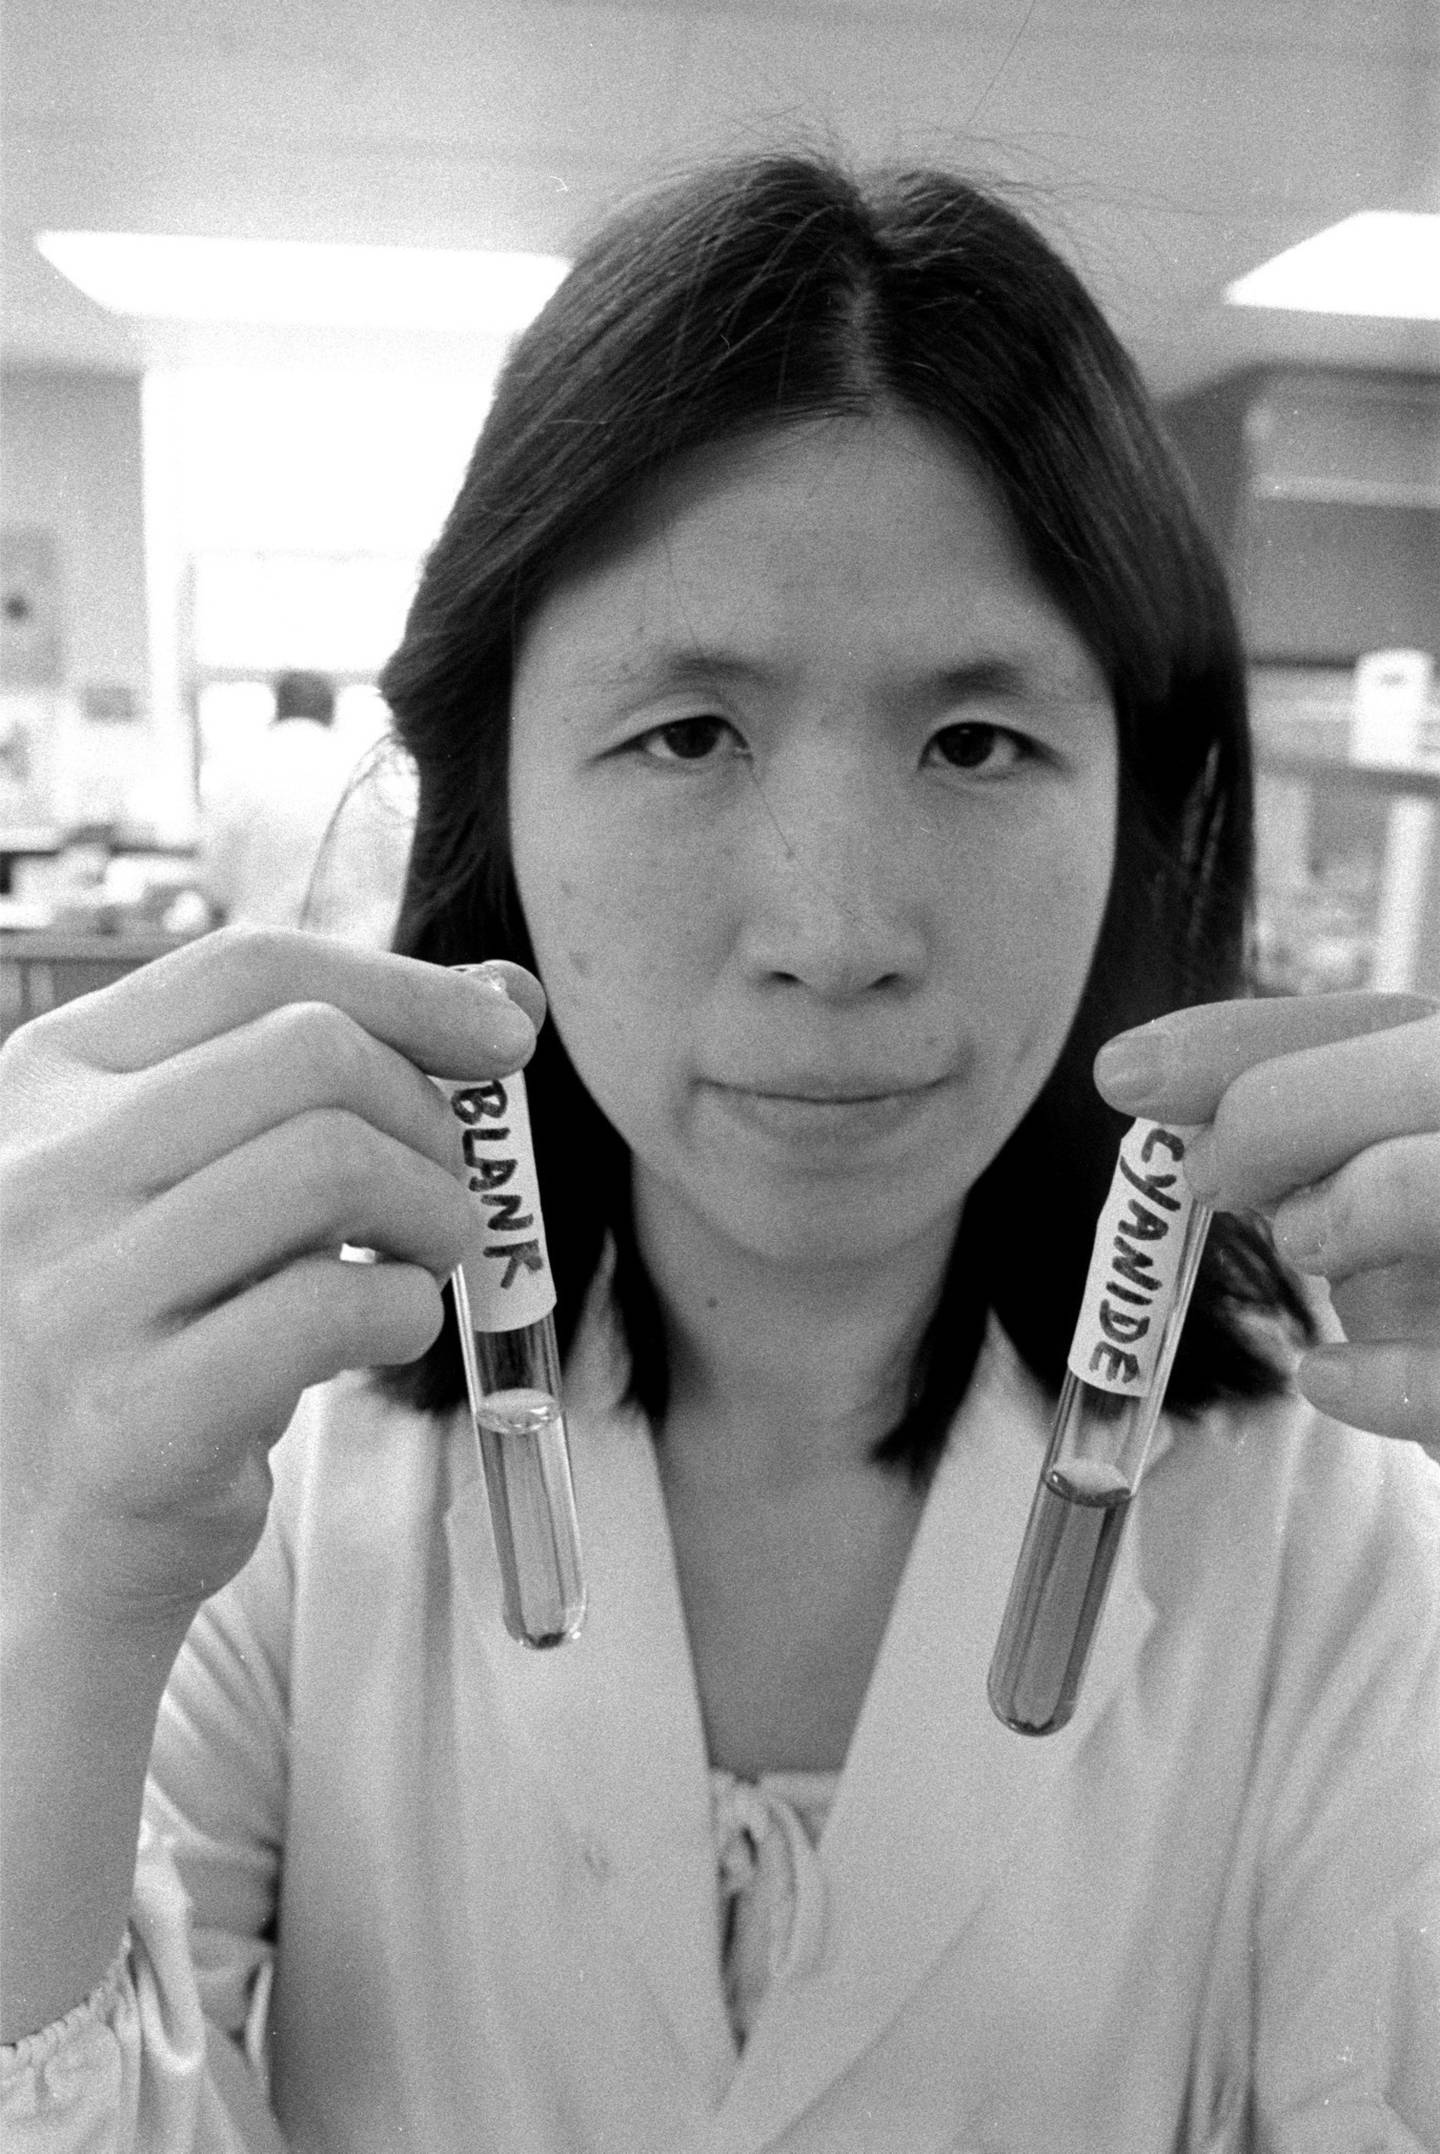 Nancy Chen of the Cook County medical examiner's office holds up test tubes containing the analyzed contents of Extra-Strength Tylenol capsules. The darker specimen at right was found to contain cyanide. 